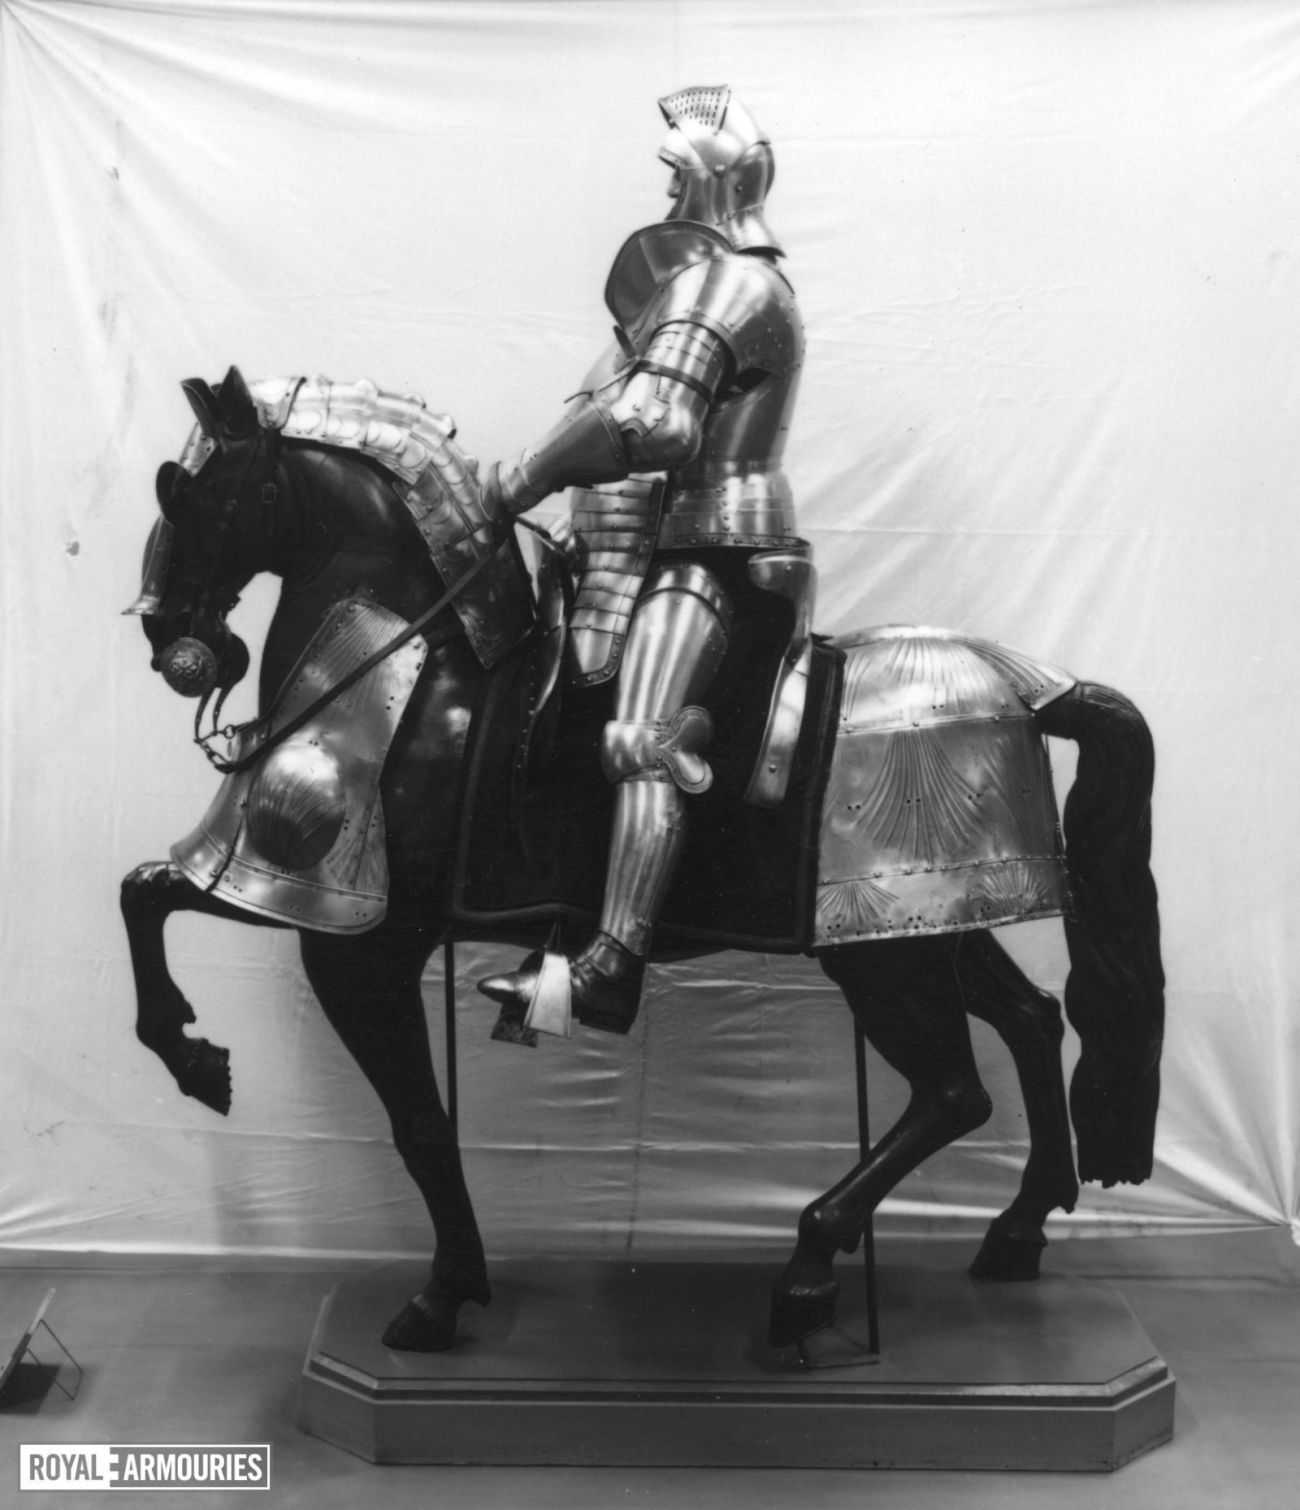 Knight in full armour on horse back